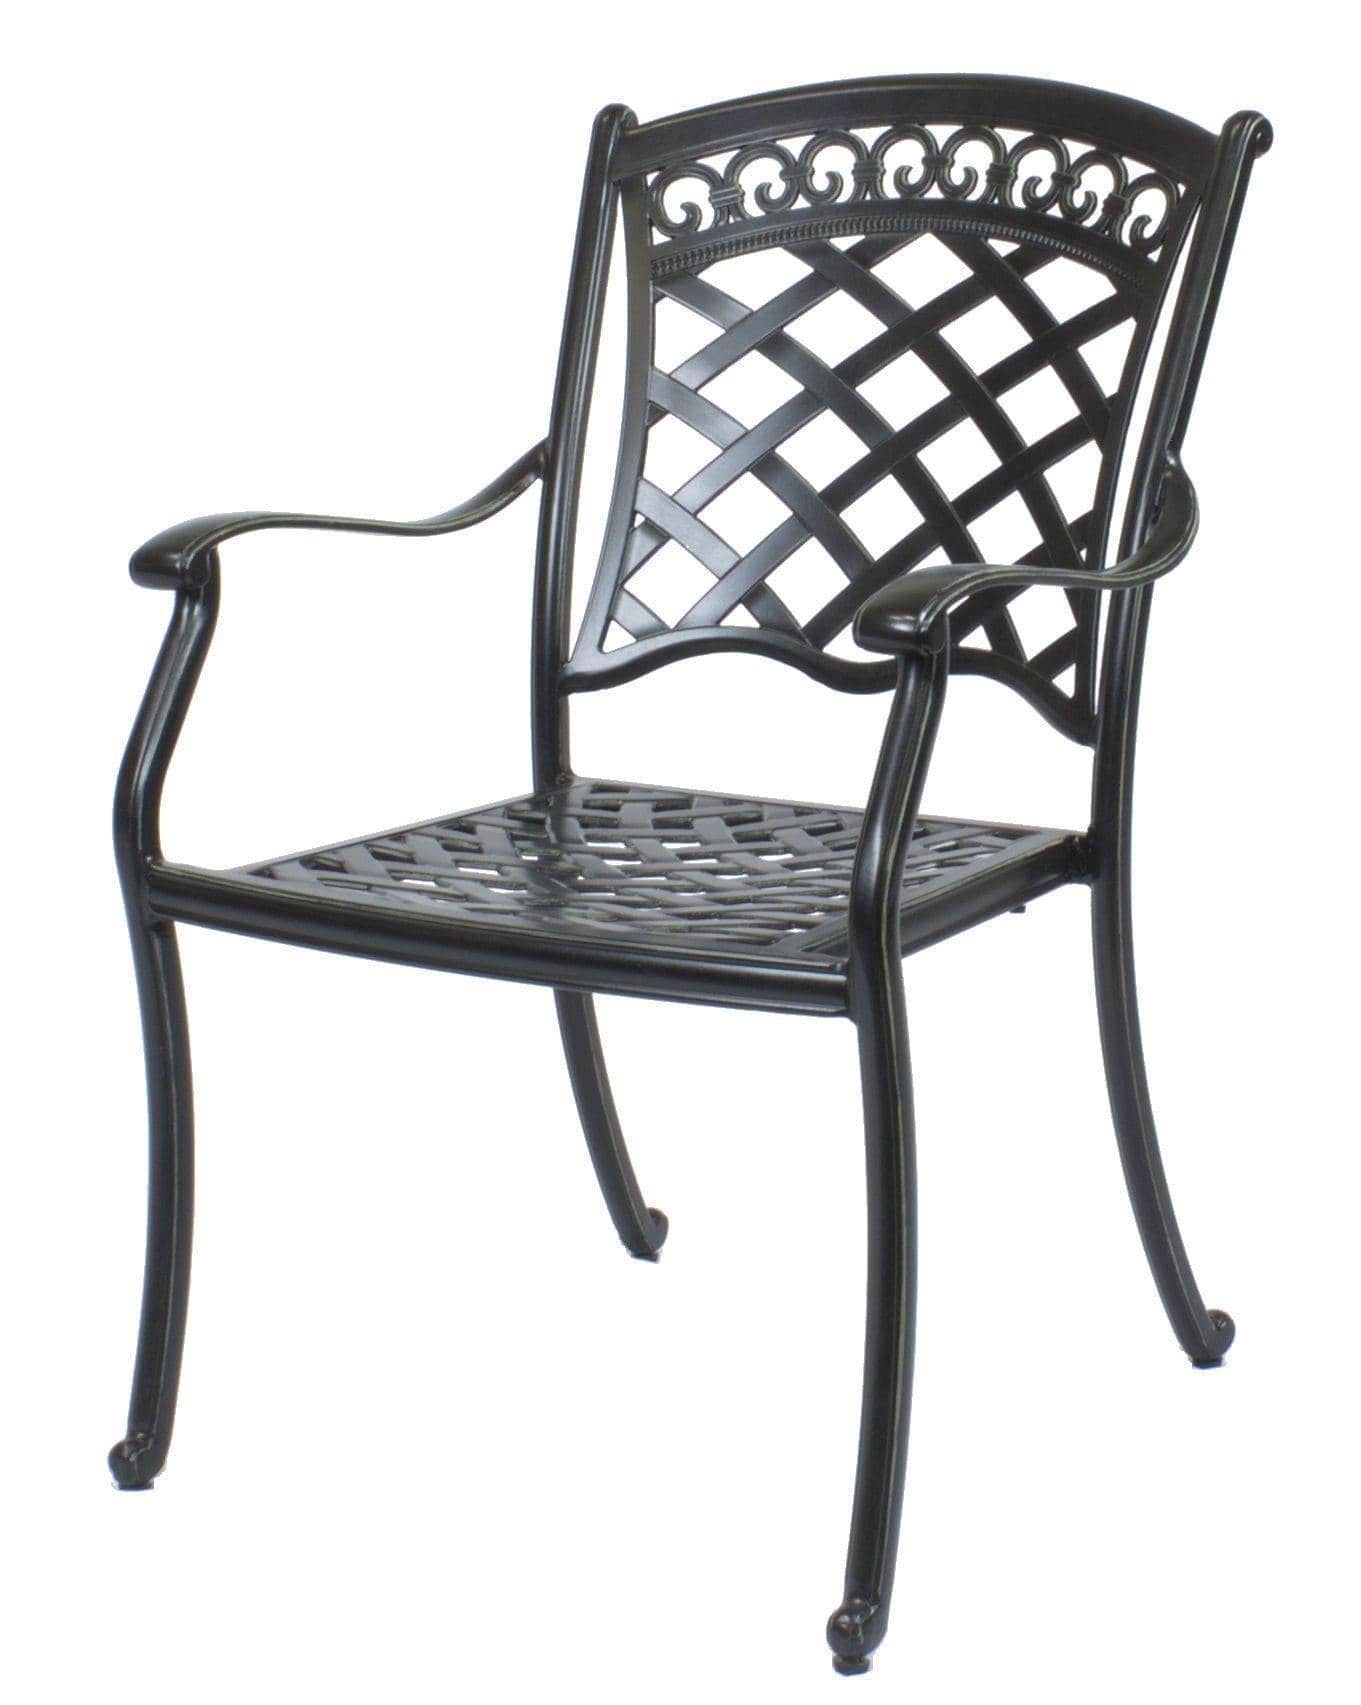 Lawton Casual Comfort Outdoor Dining Chairs Lawton Casual Comfort - Cast Aluminum Dining Chairs with Cushions (Set of 4)